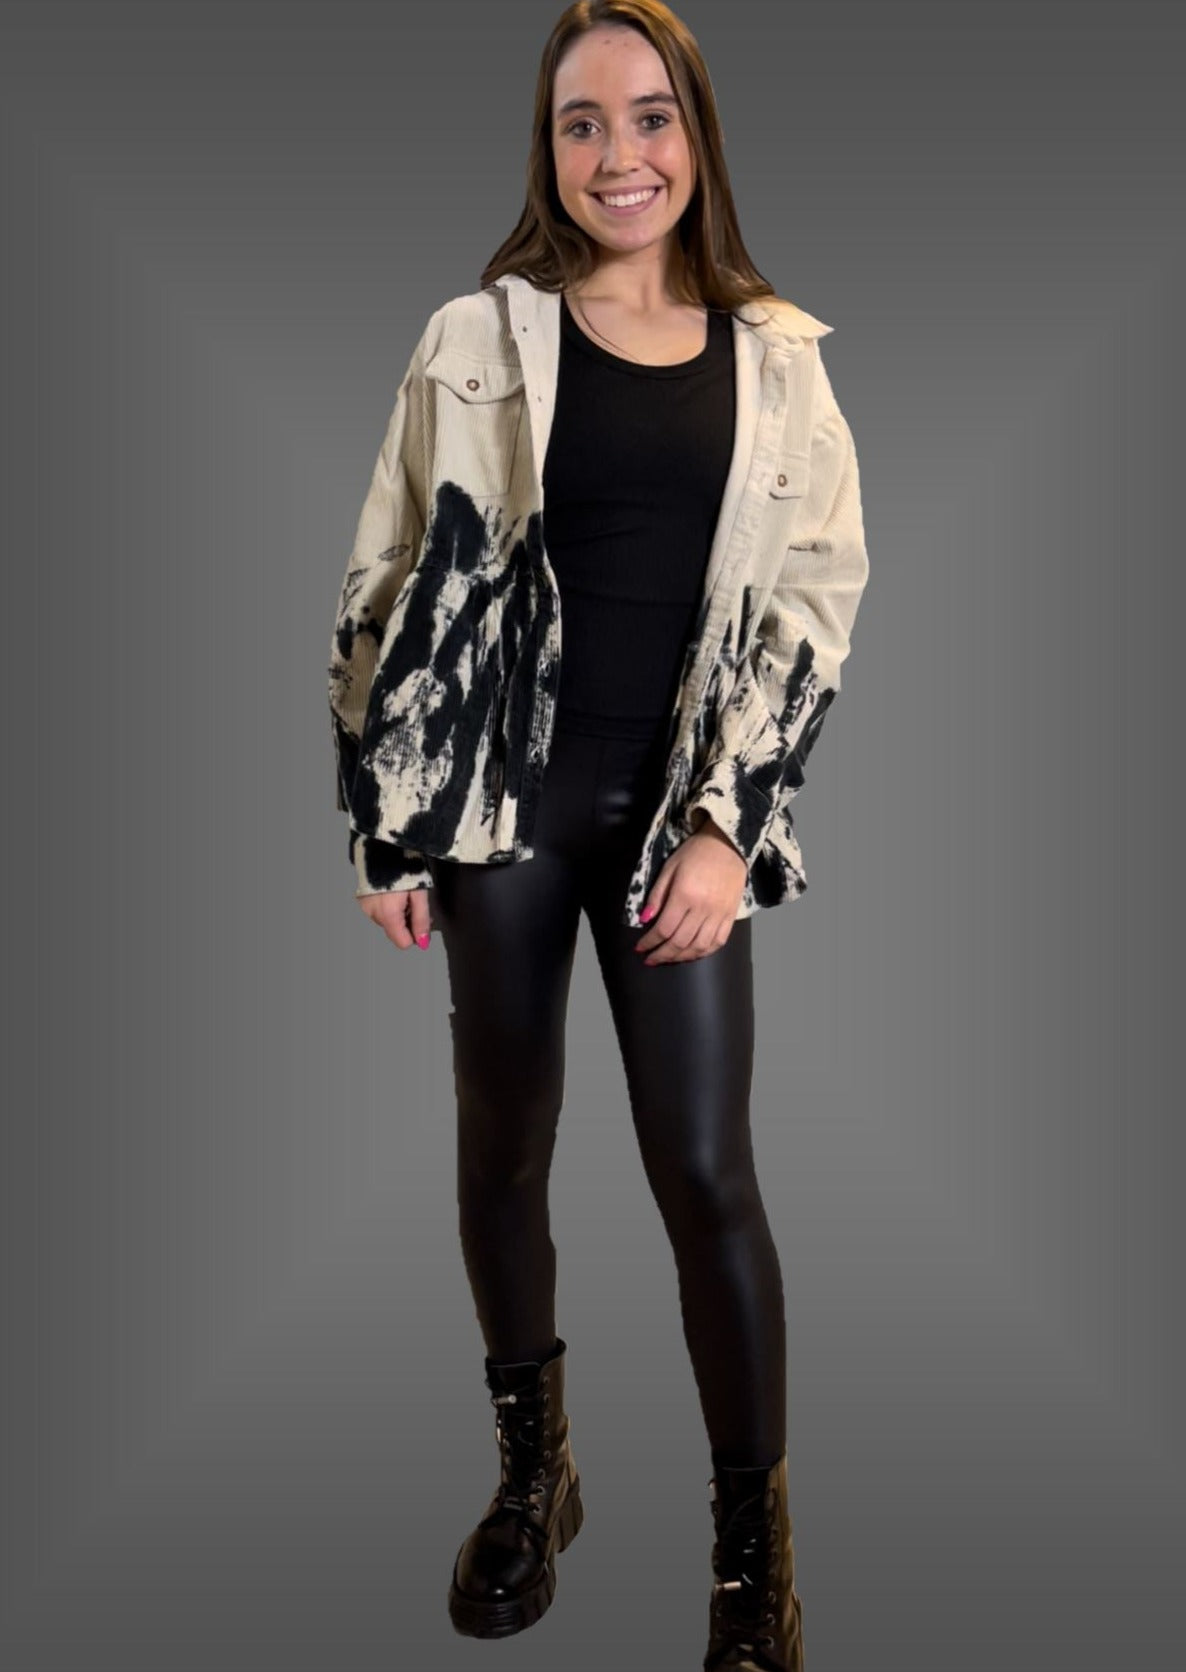 Made in USA Corduroy Button Down Tie Dye Tan & Black Jacket | Style# T70265-02 | Brand: Blue Buttercup | Classy Cozy Cool Women's Clothing Boutique